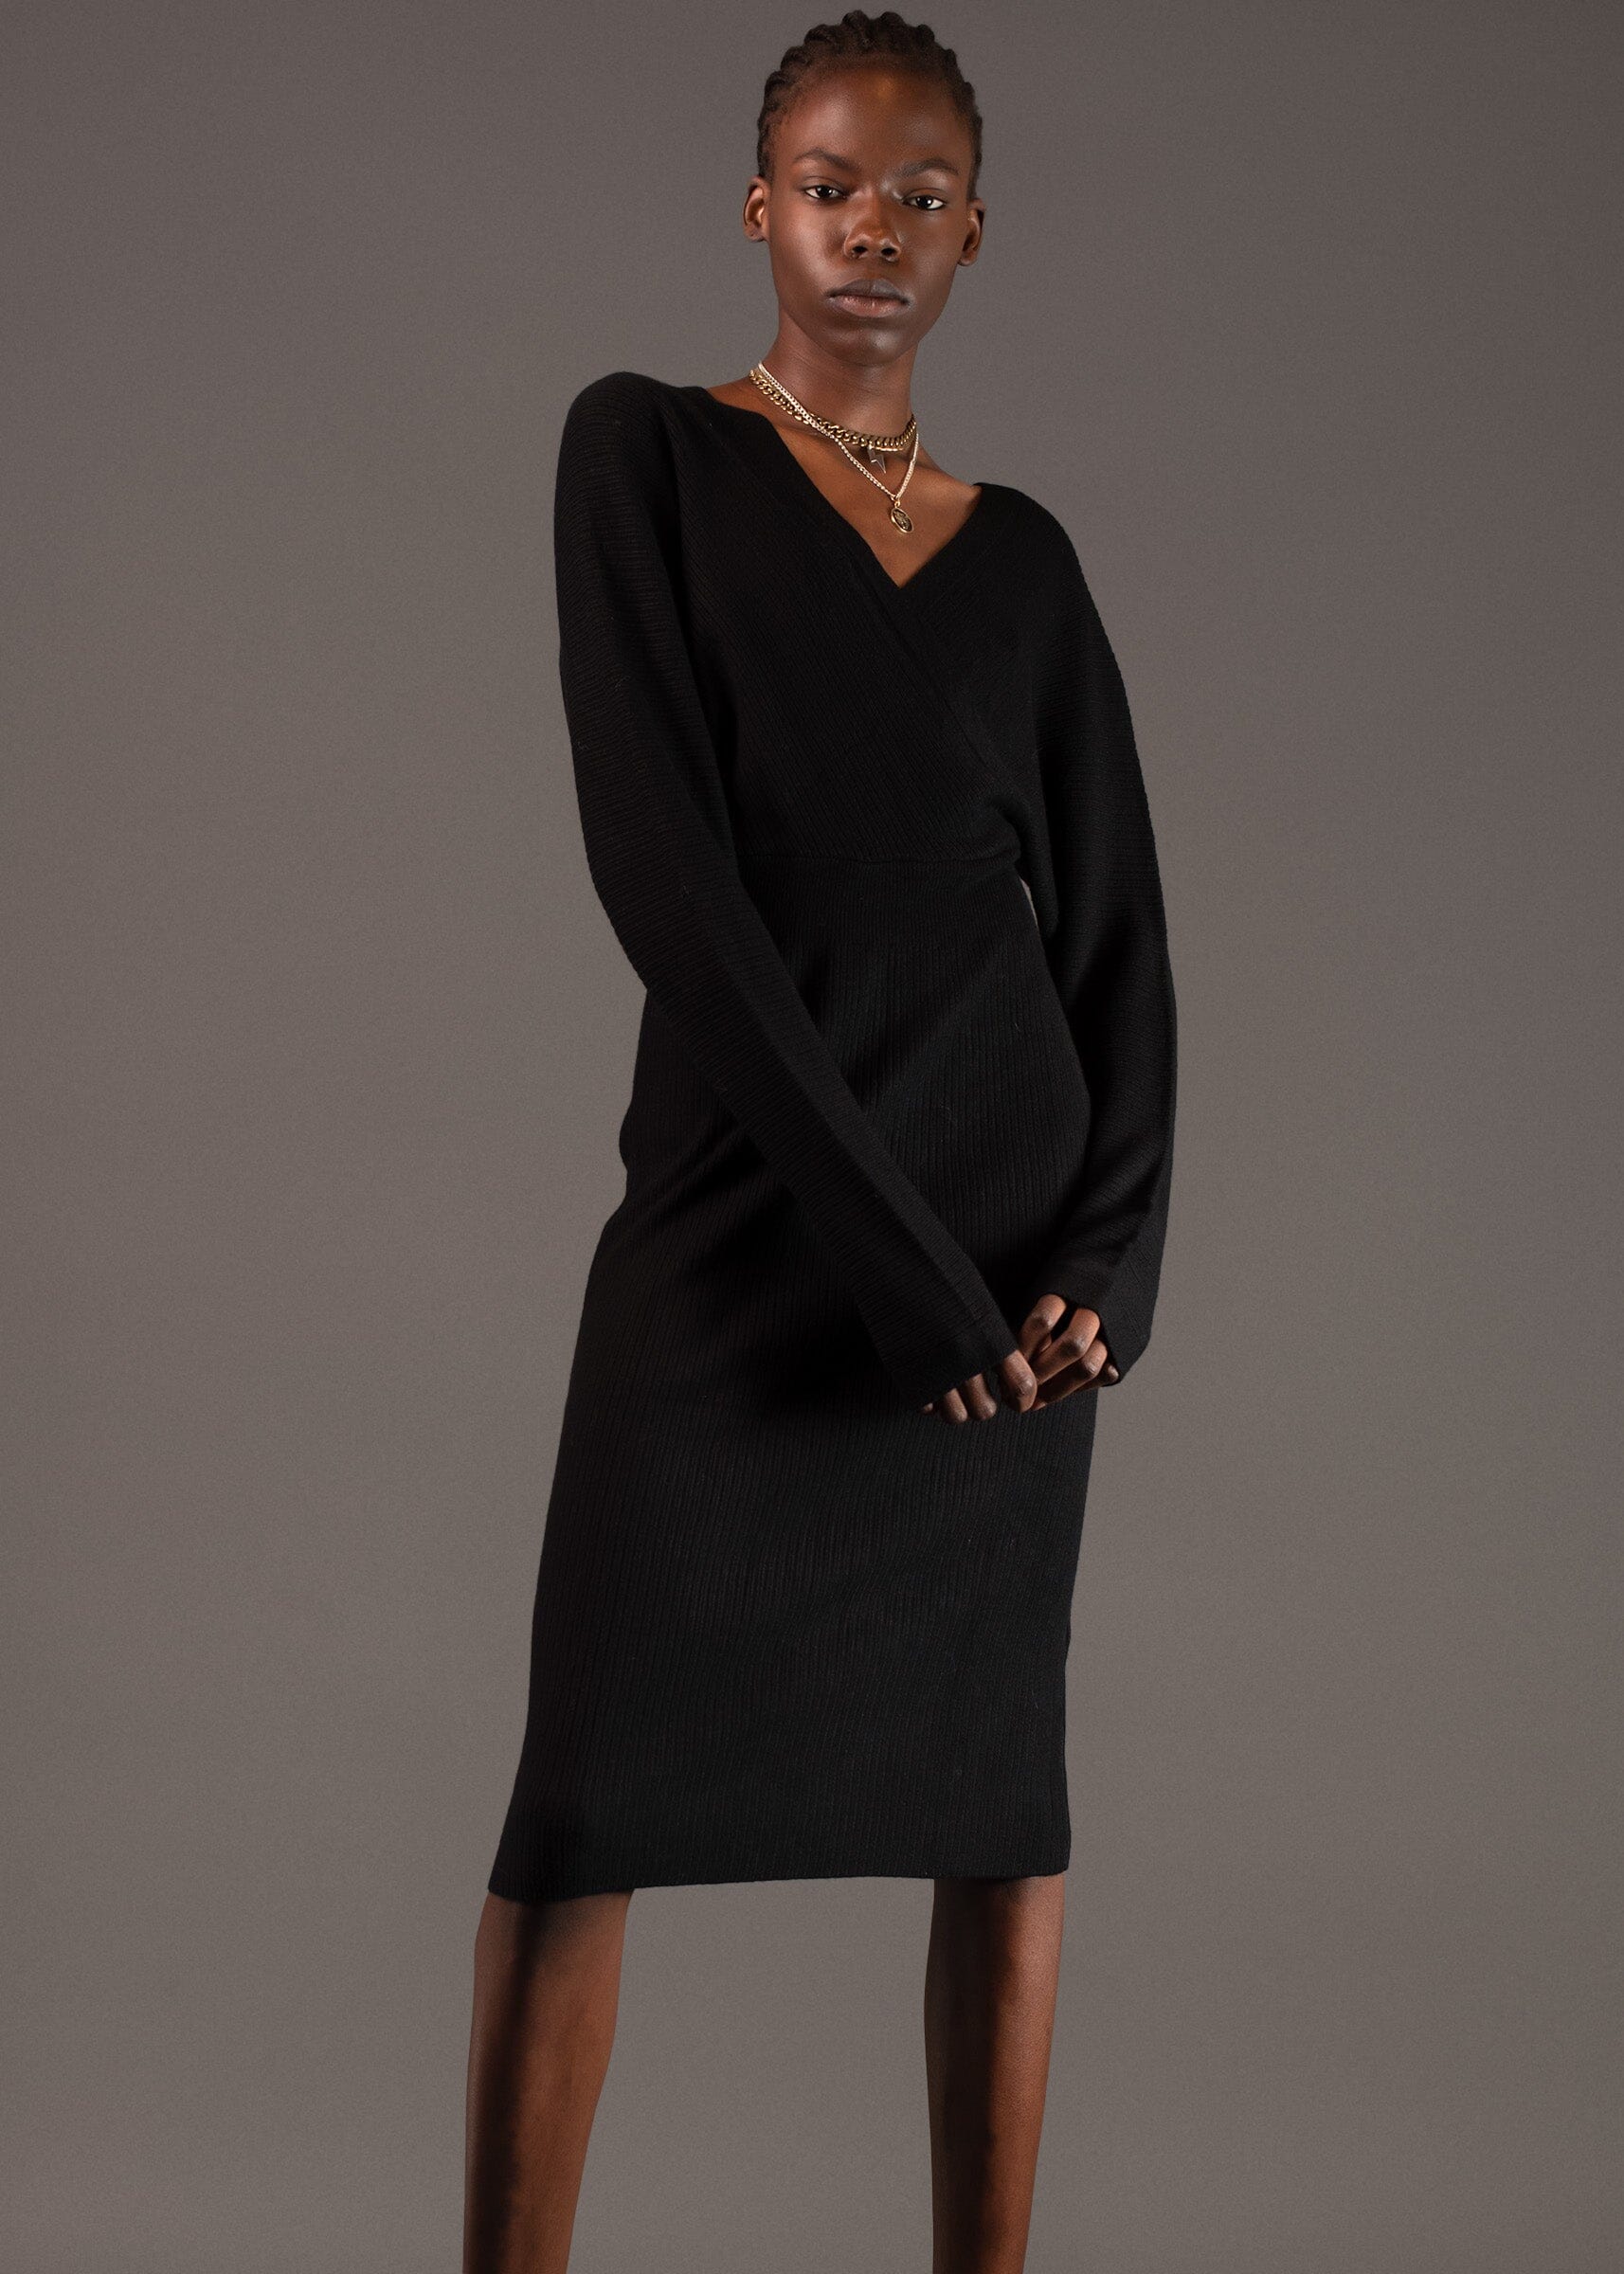 Fitted V Neck Sweater Dress Dresses Kate Hewko 